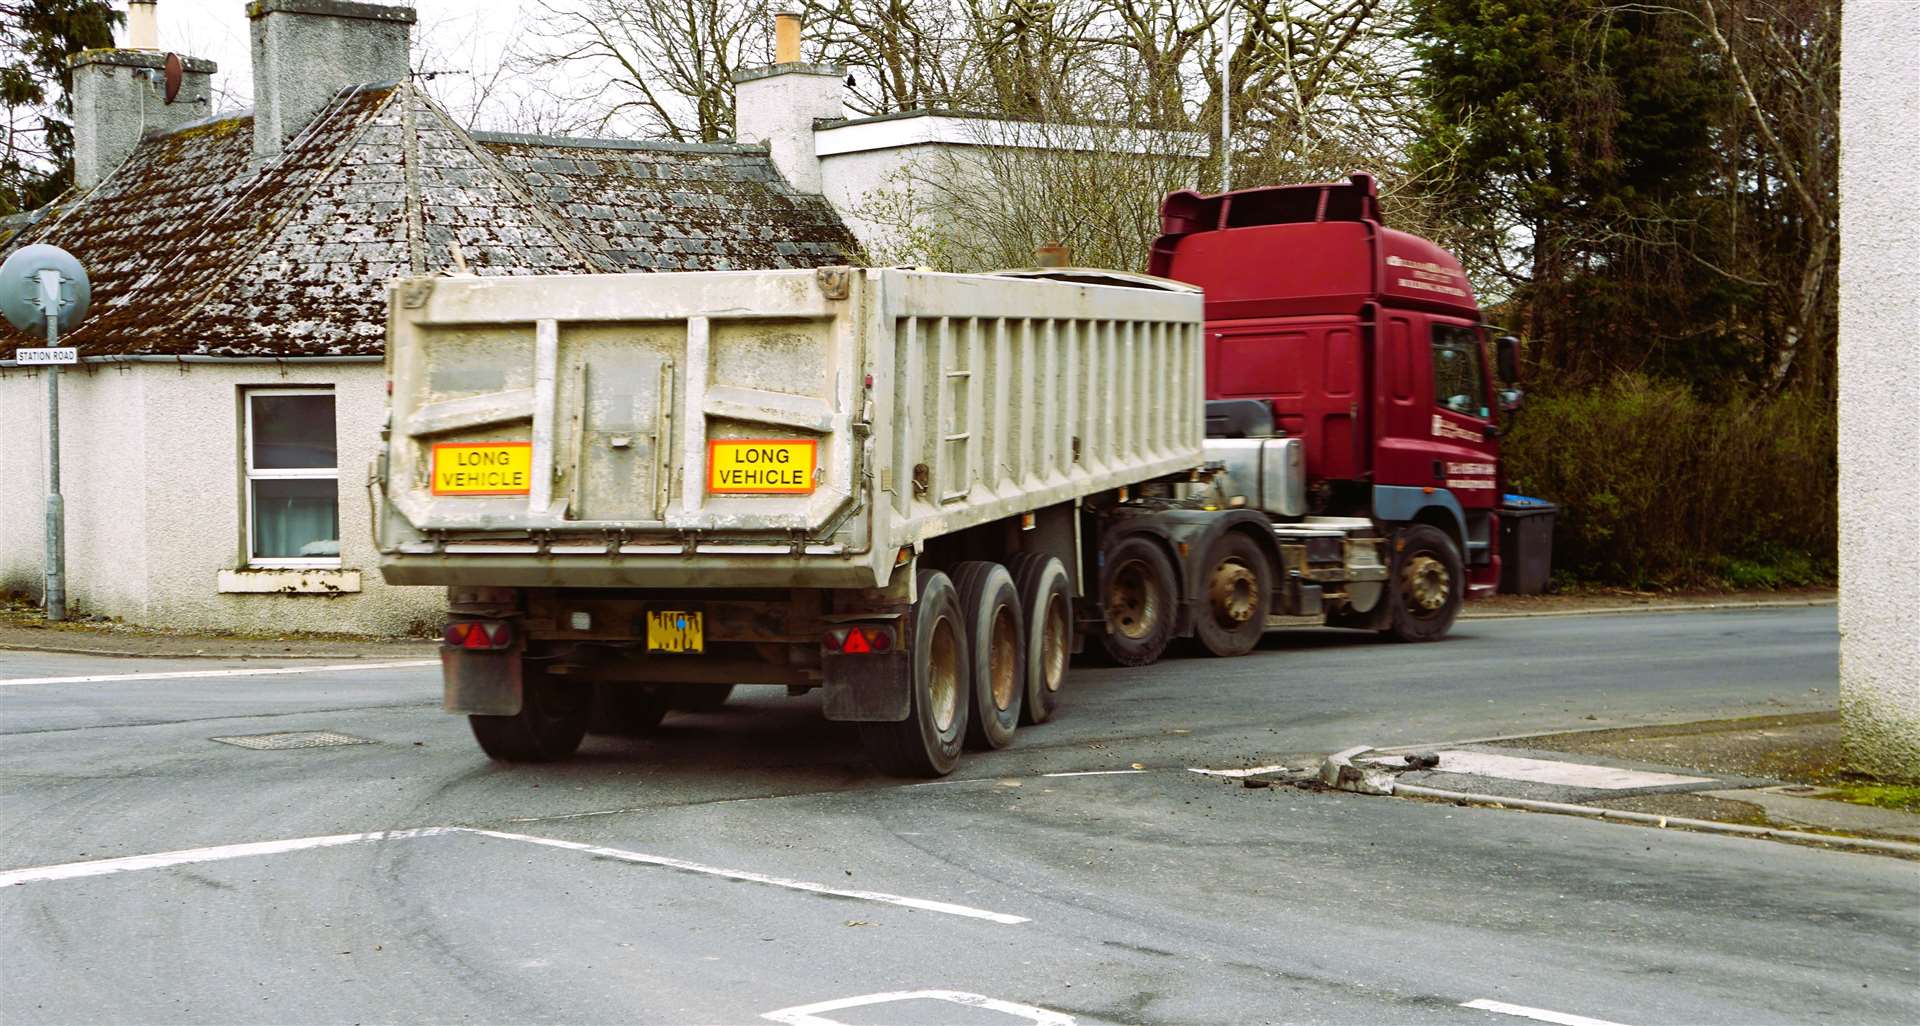 This lorry negotiated the turn well but many do not. Picture: DGS